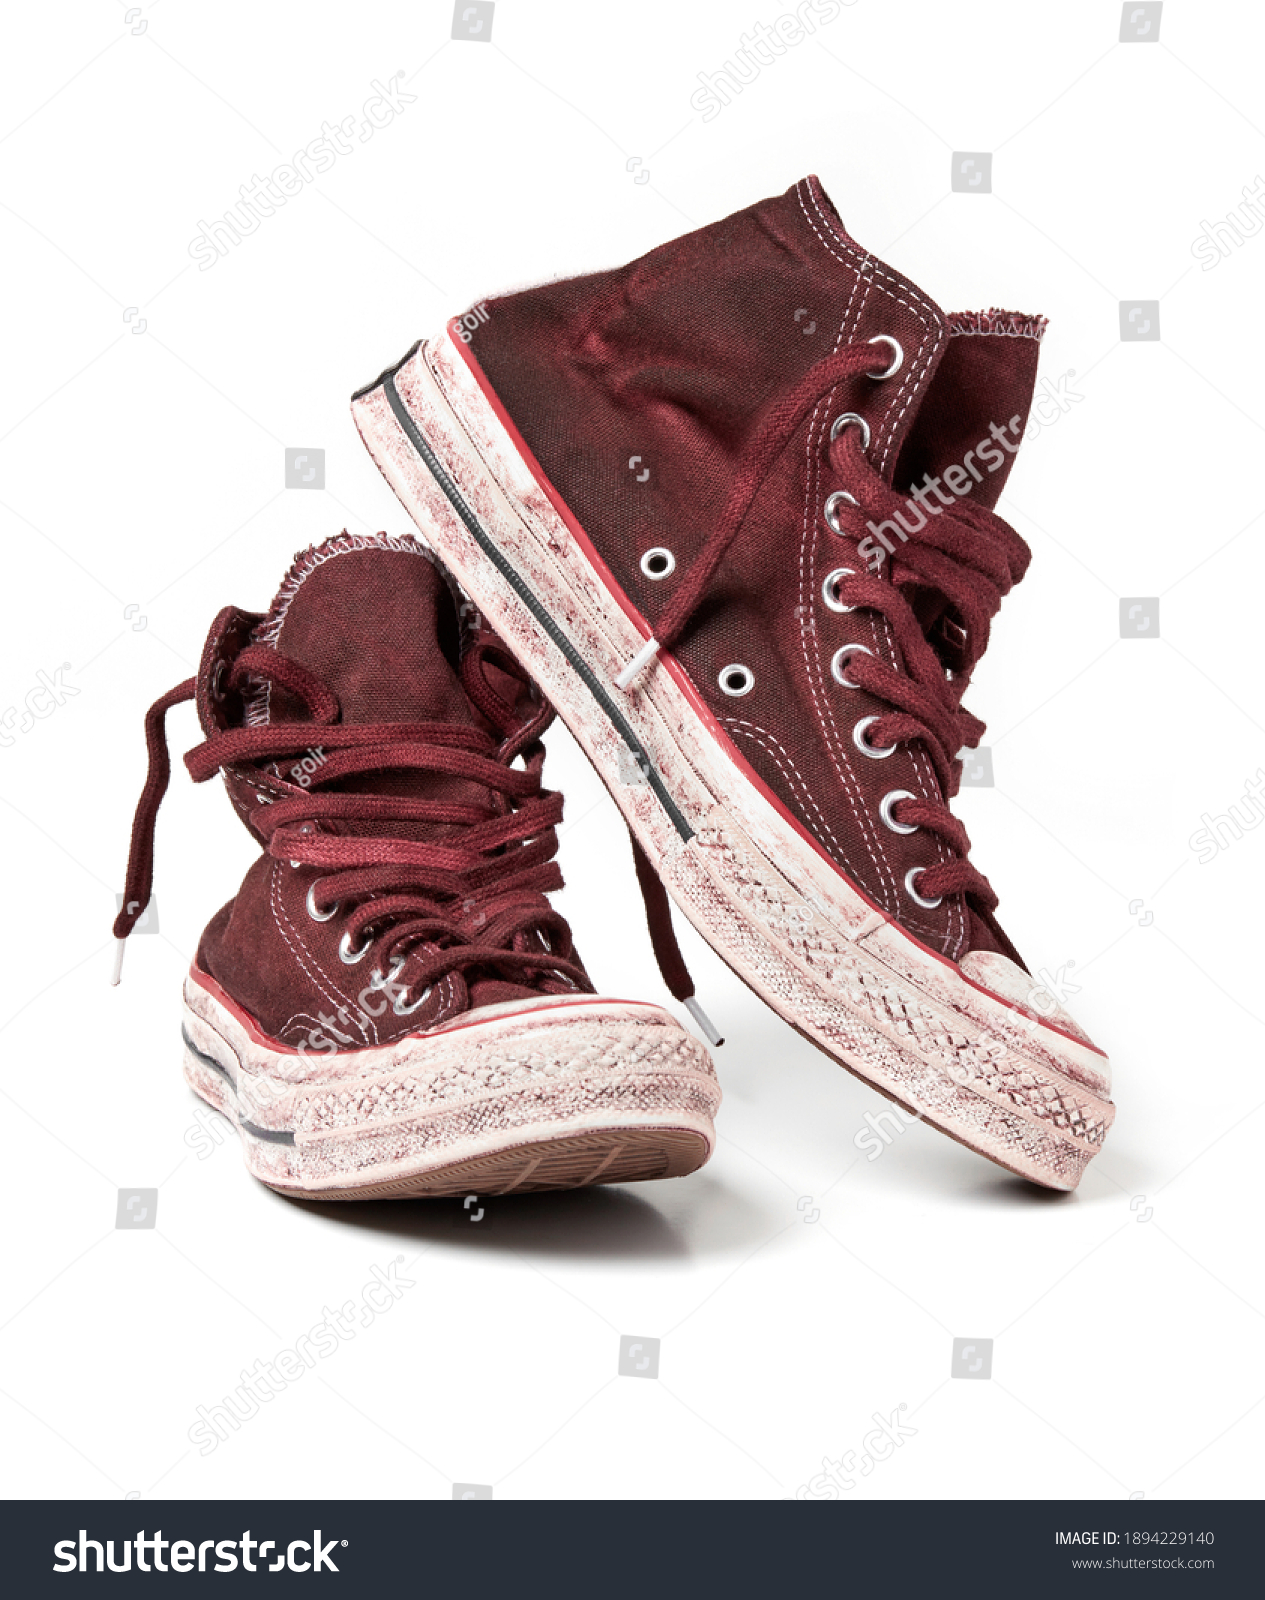 Purple Canvas Shoes On White Background Stock Photo 1894229140 ...